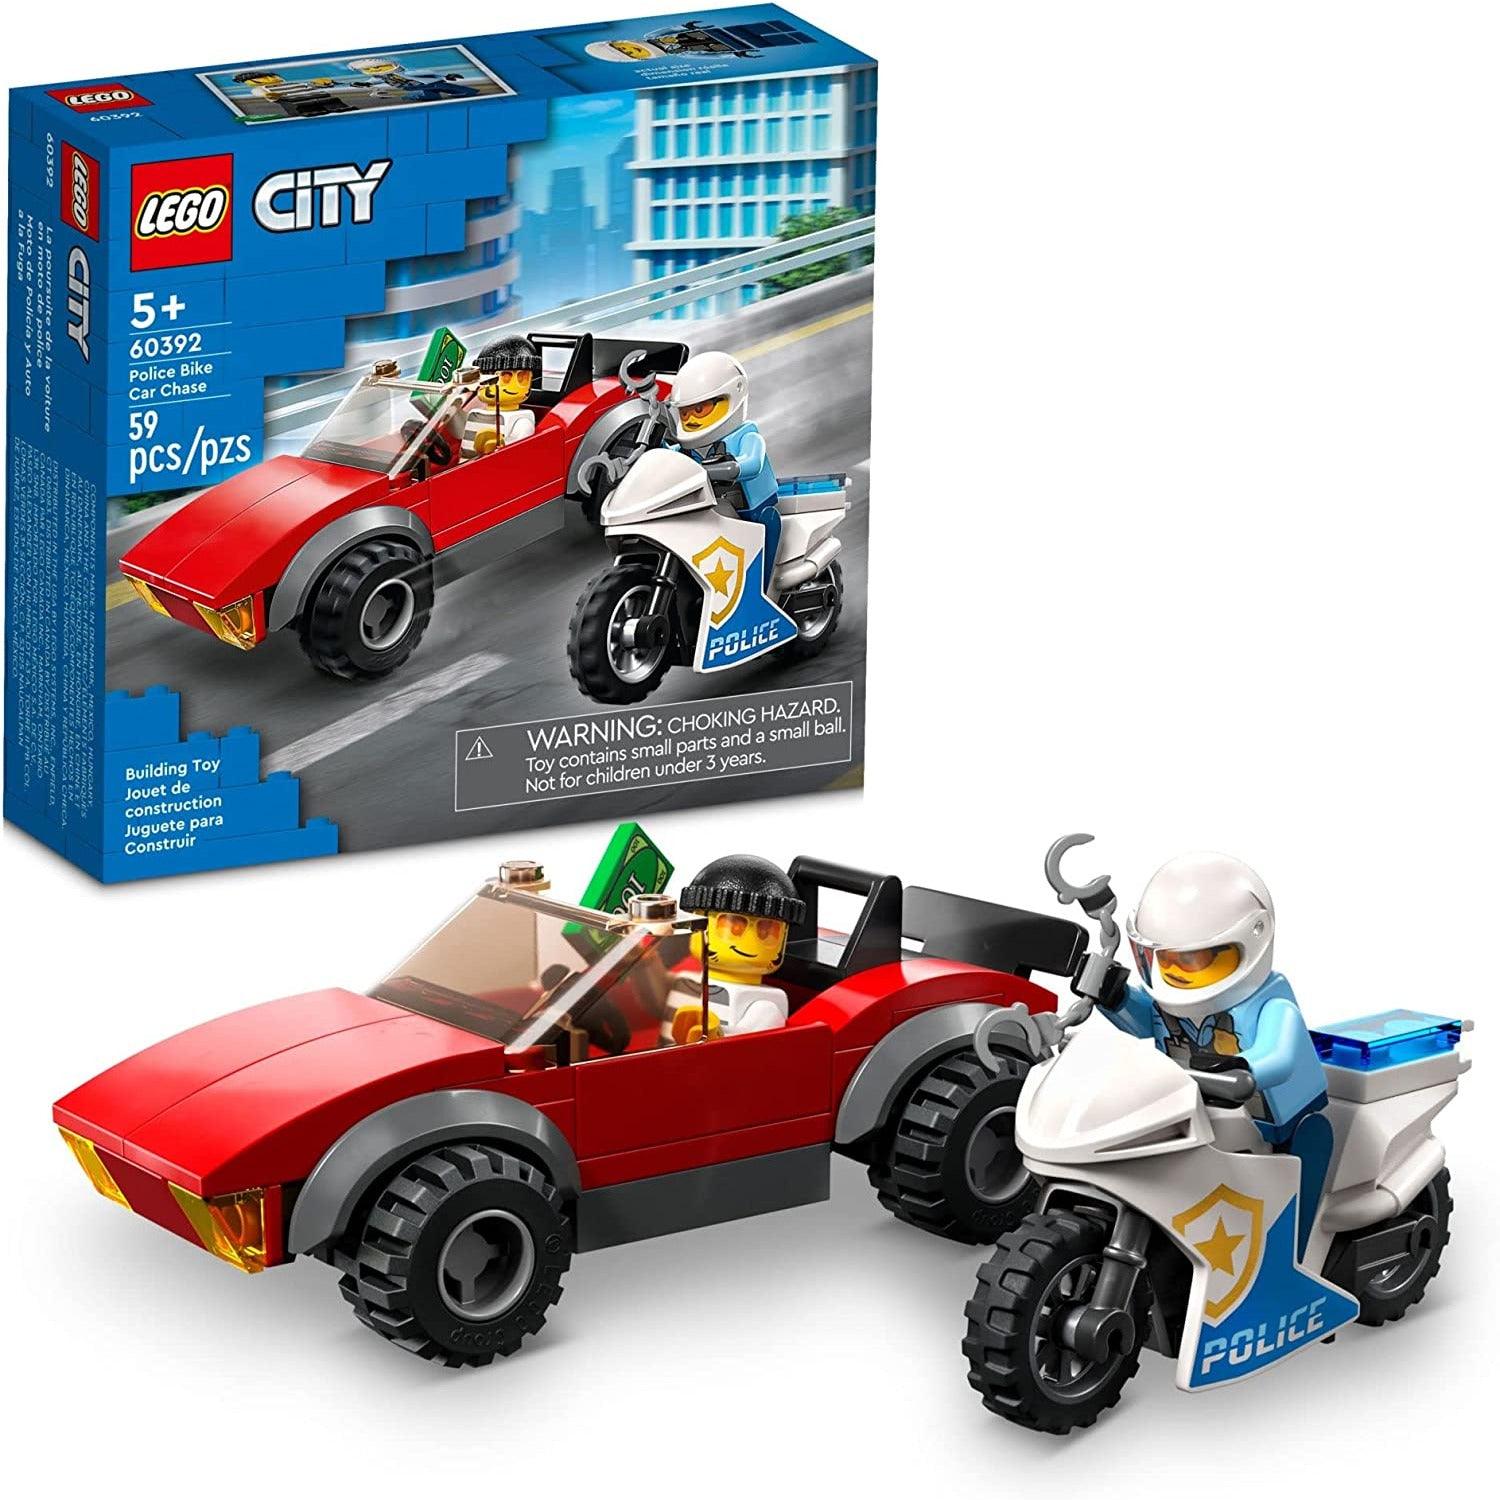 LEGO City 60392 Police Bike Car Chase, Toy with Racing Vehicle & Motorbike Toys (59 Pieces)